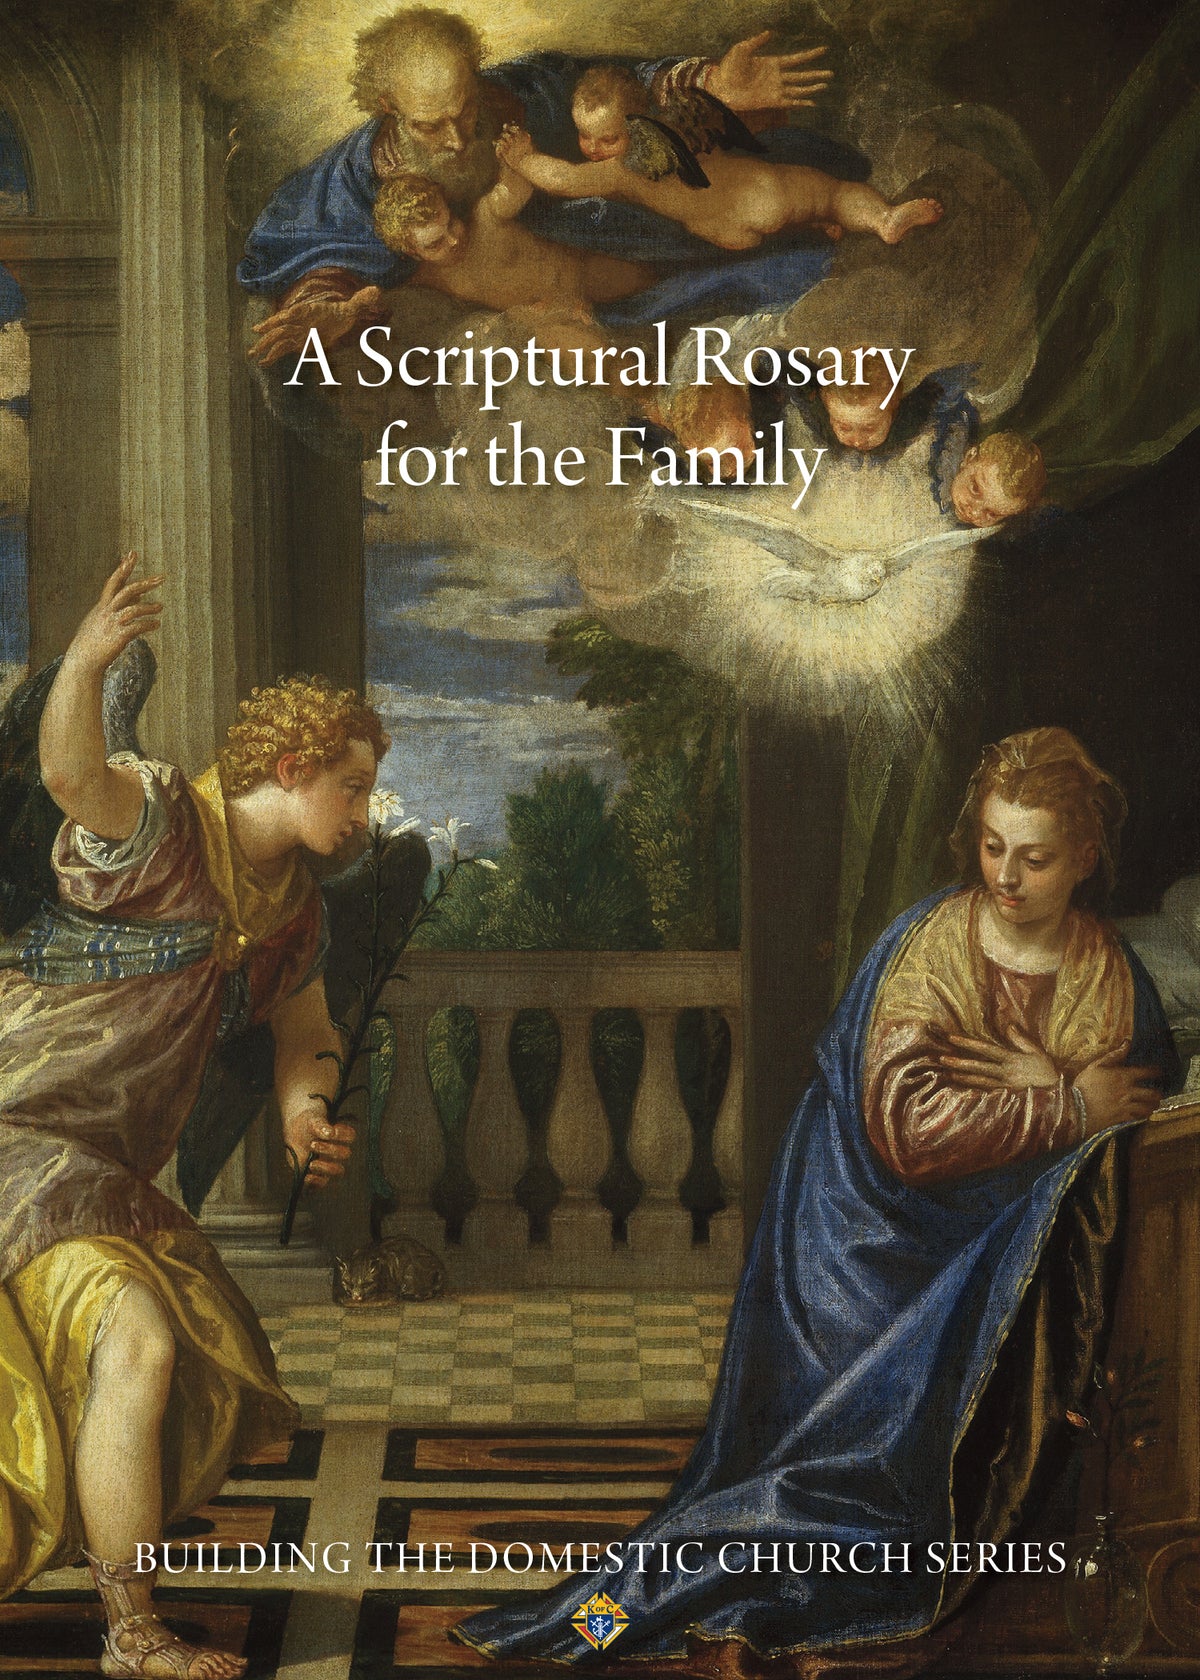 A Scriptural Rosary for the Family